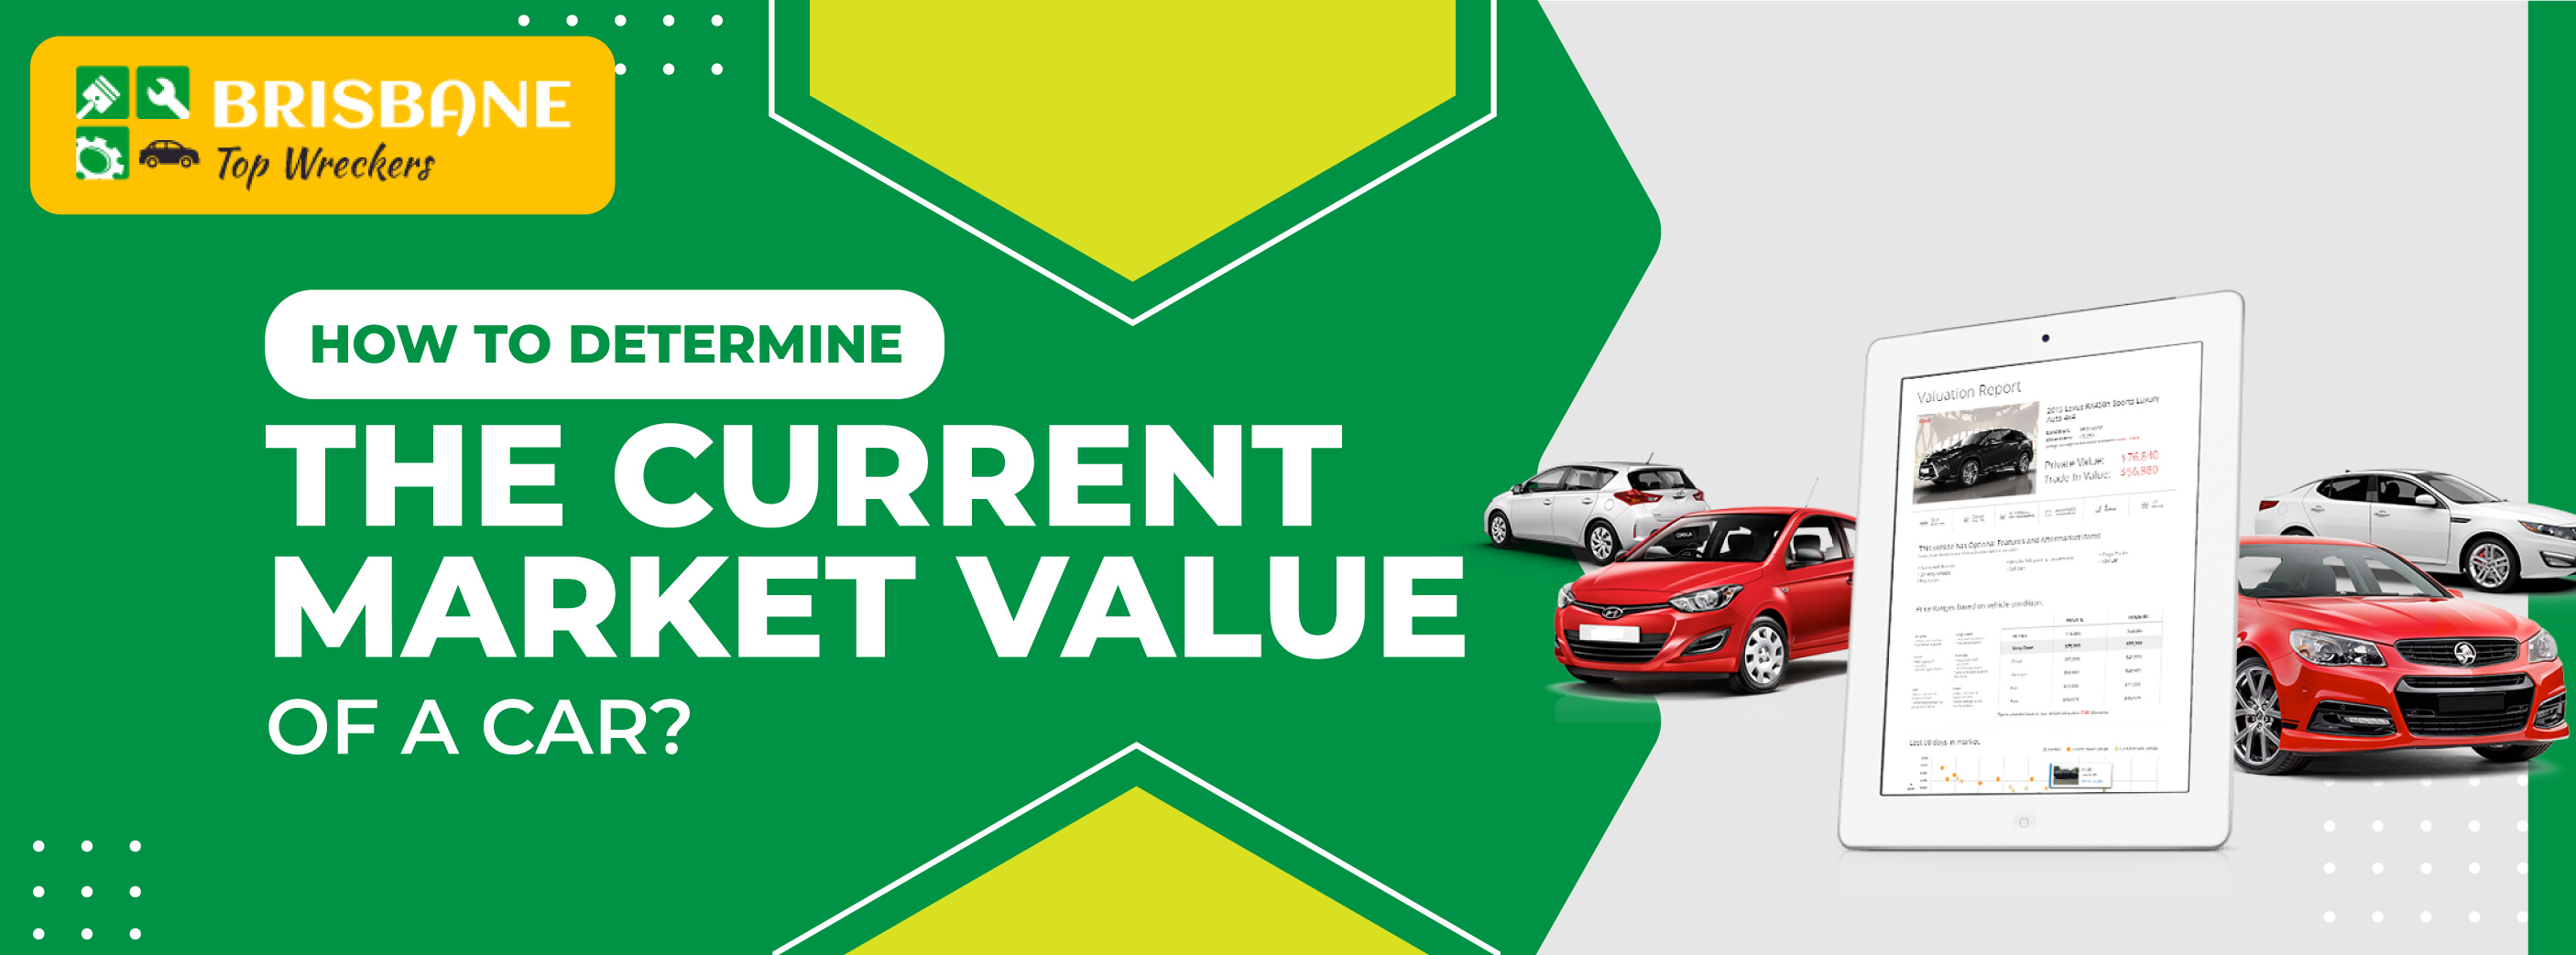 How To Determine The Current Market Value Of A Car